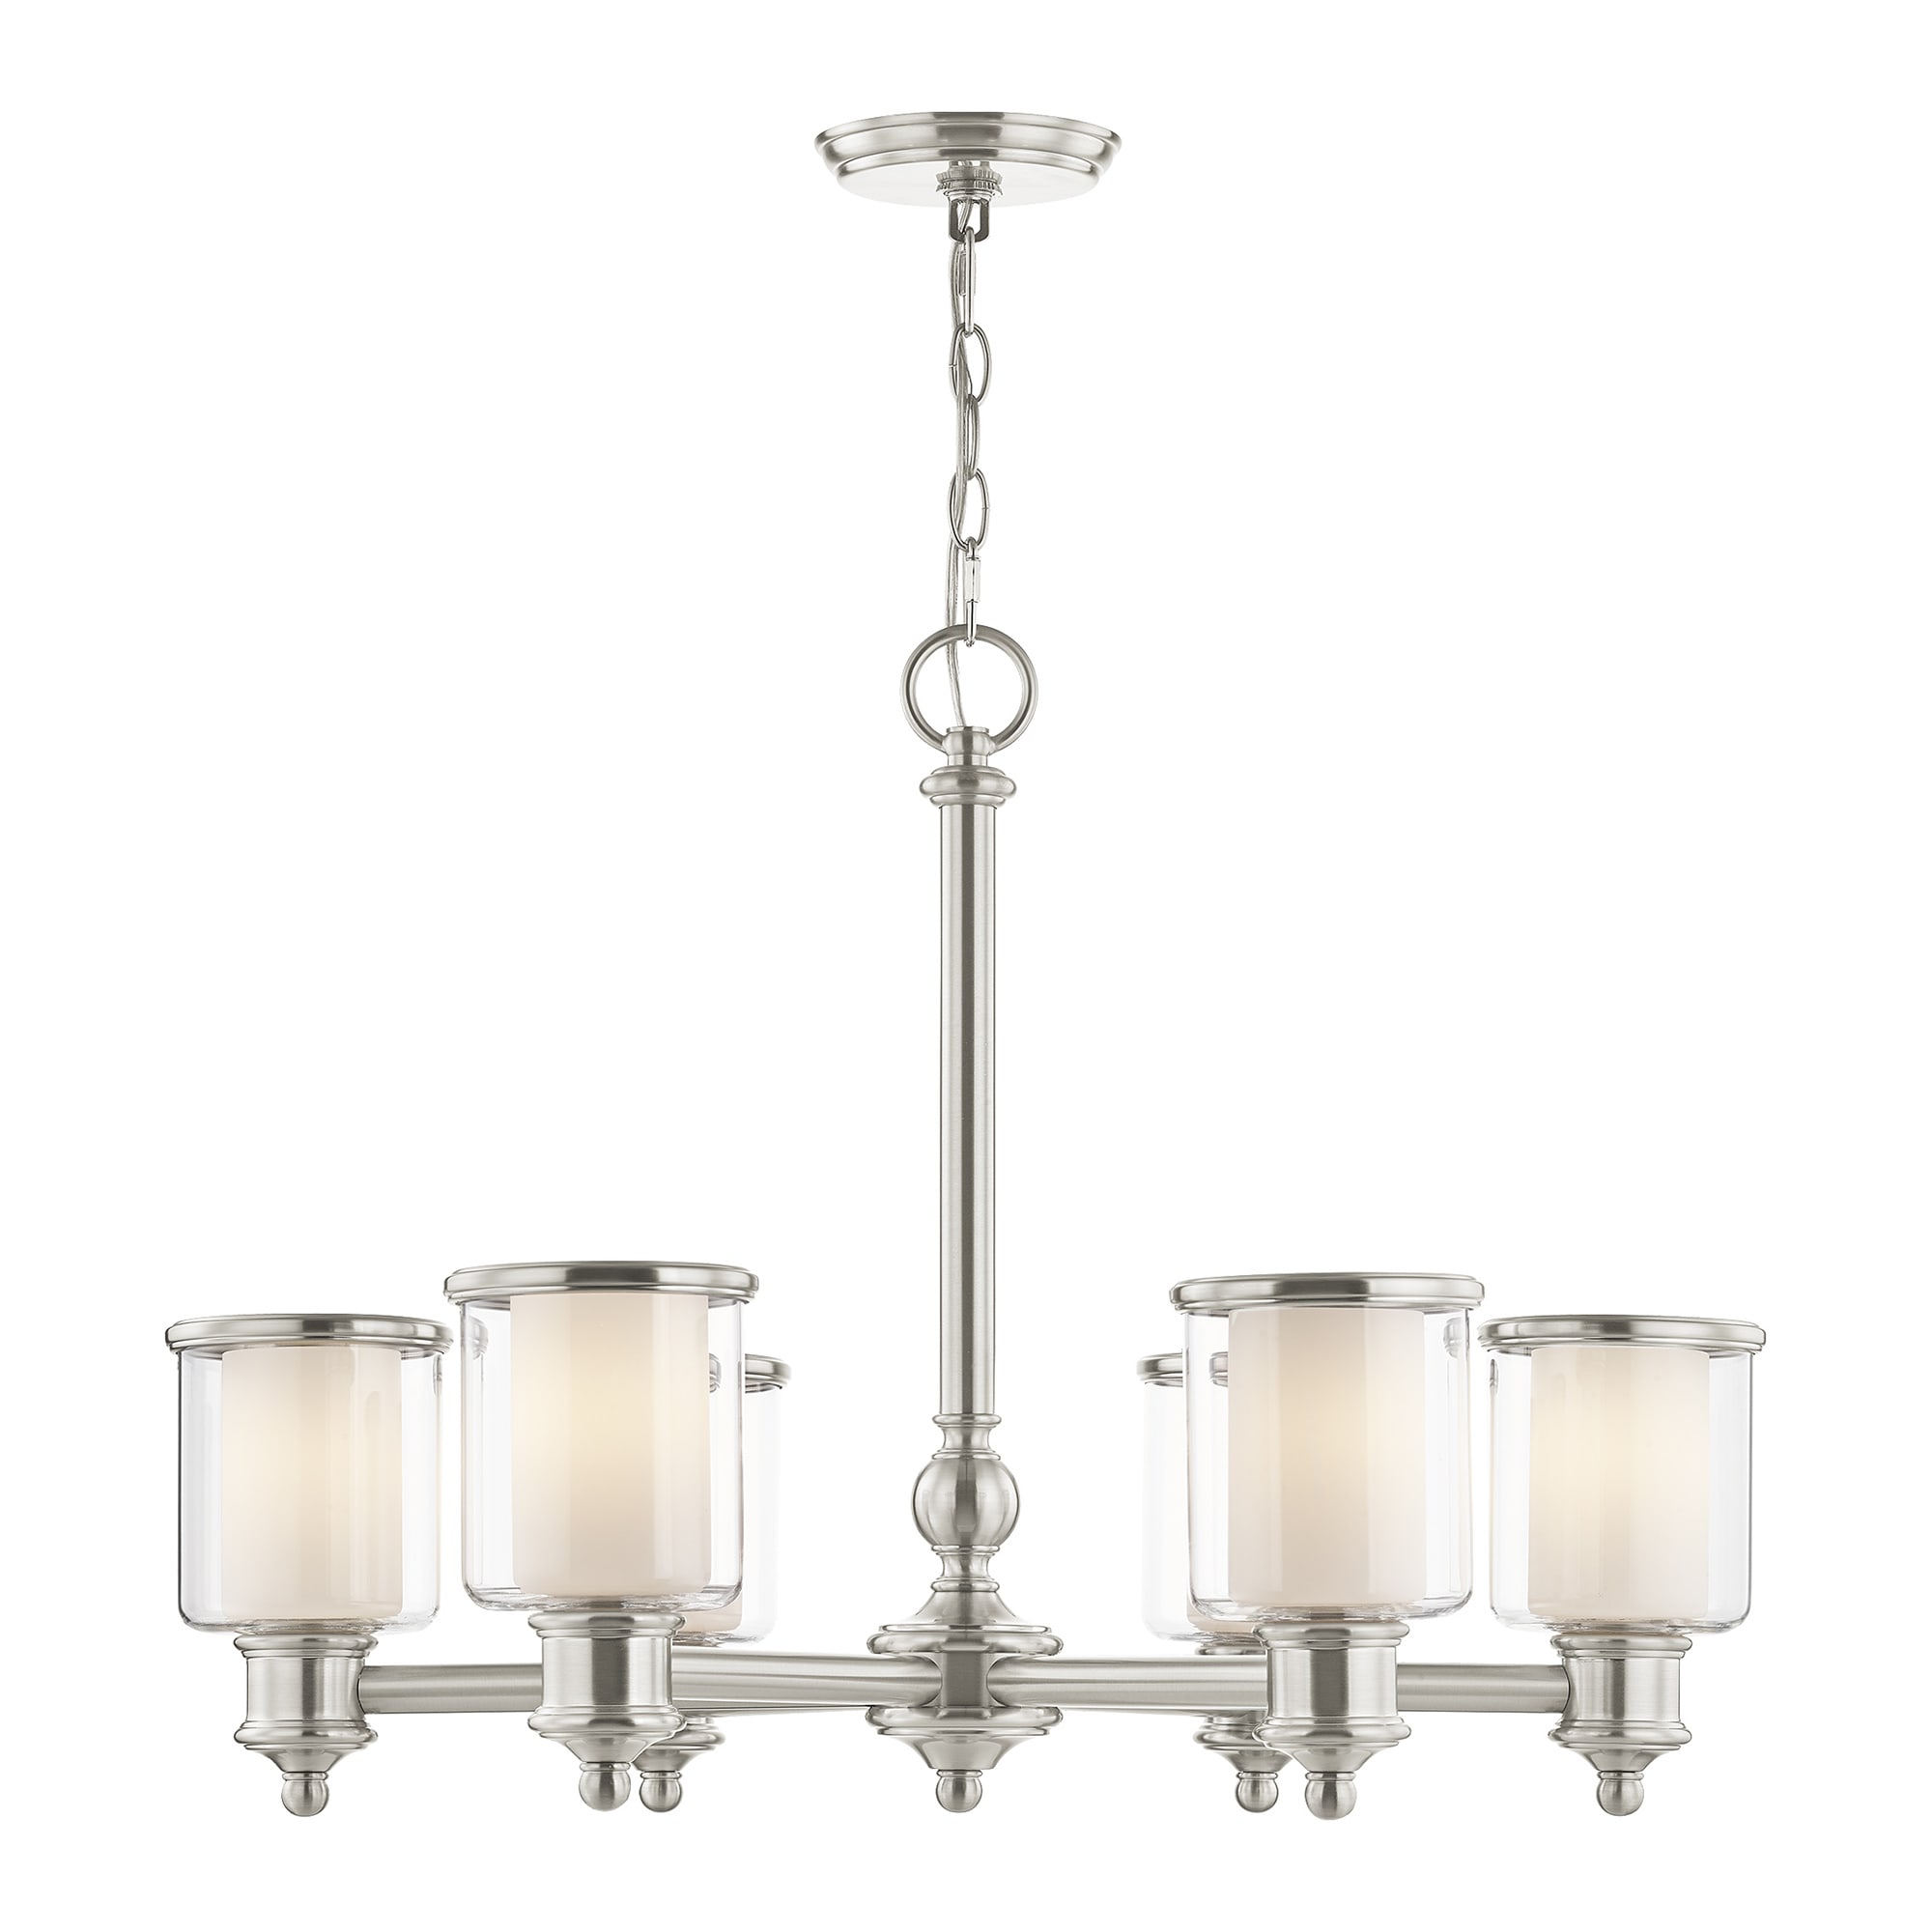 Finish Brushed Nickel Nckl Livex Lighting 40206-91 Transitional Six Light Chandelier from Middlebush Collection in Pwt Slvr B/S